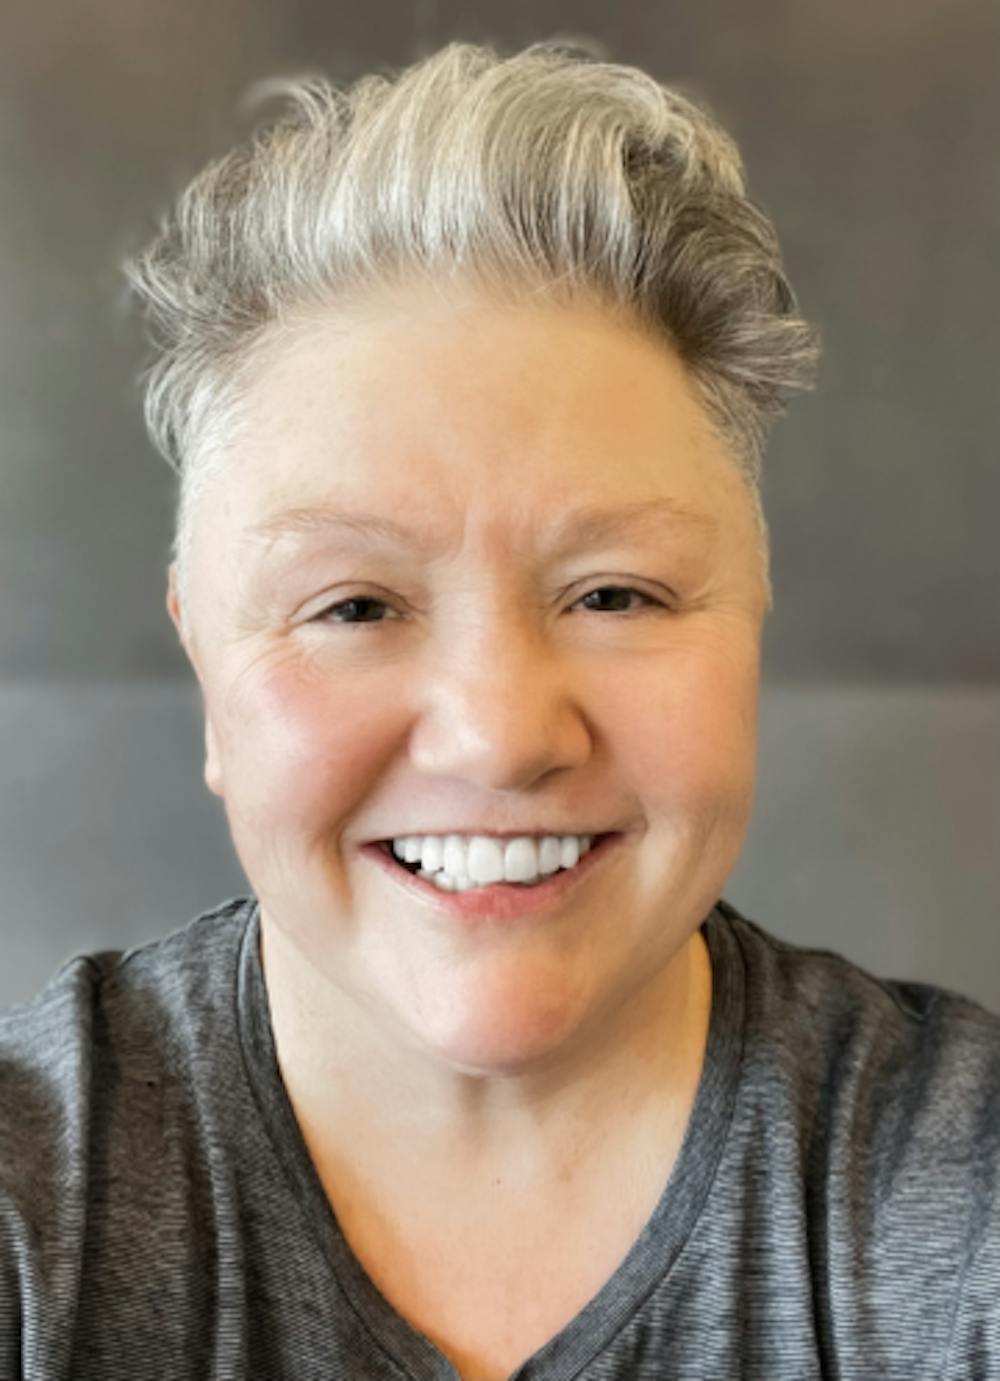 <p>Denice Torres, 1981 Ball State psychology graduate, was named to the Surface Oncology board of directors July 8, 2021. The pharmaceutical company researches immunotherapies for cancerous tumors. <strong>Surface Oncology, Photo Provided</strong></p>